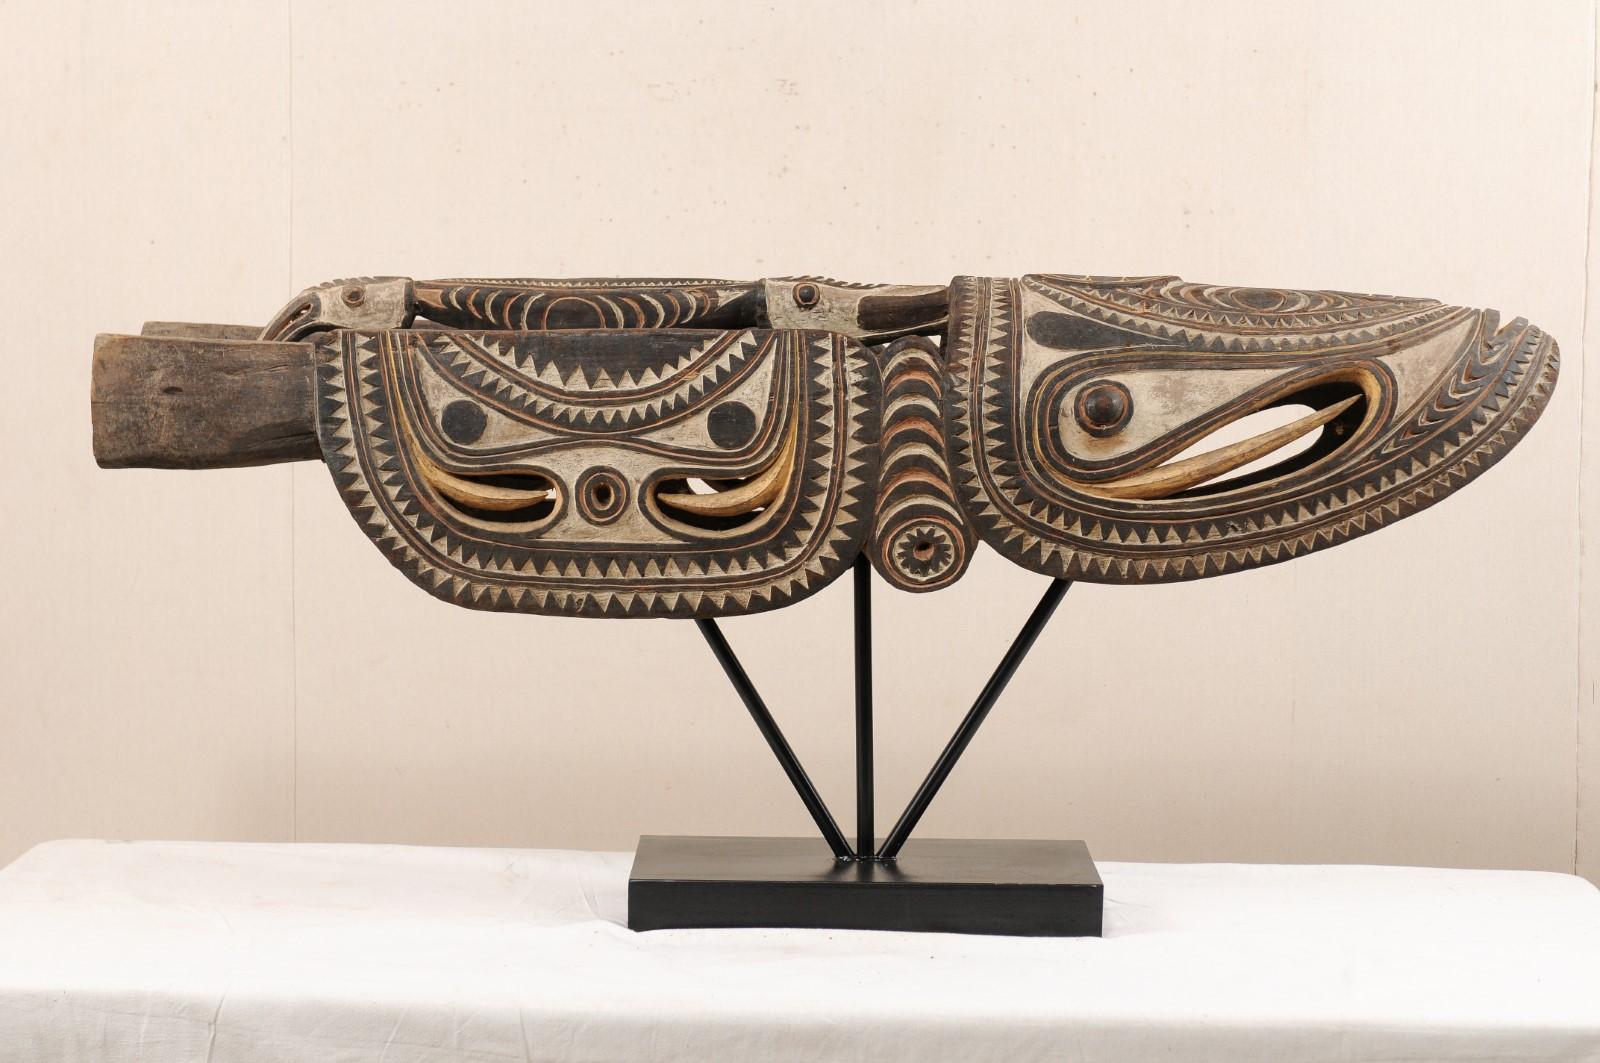 A large-sized Papua New Guinea carved canoe prow from the Upper Sepik River region on custom stand. This vintage boat prow from Papua New Guinea has been carved out of wood and features a stylized crocodile motif with elaborate pigmentation which